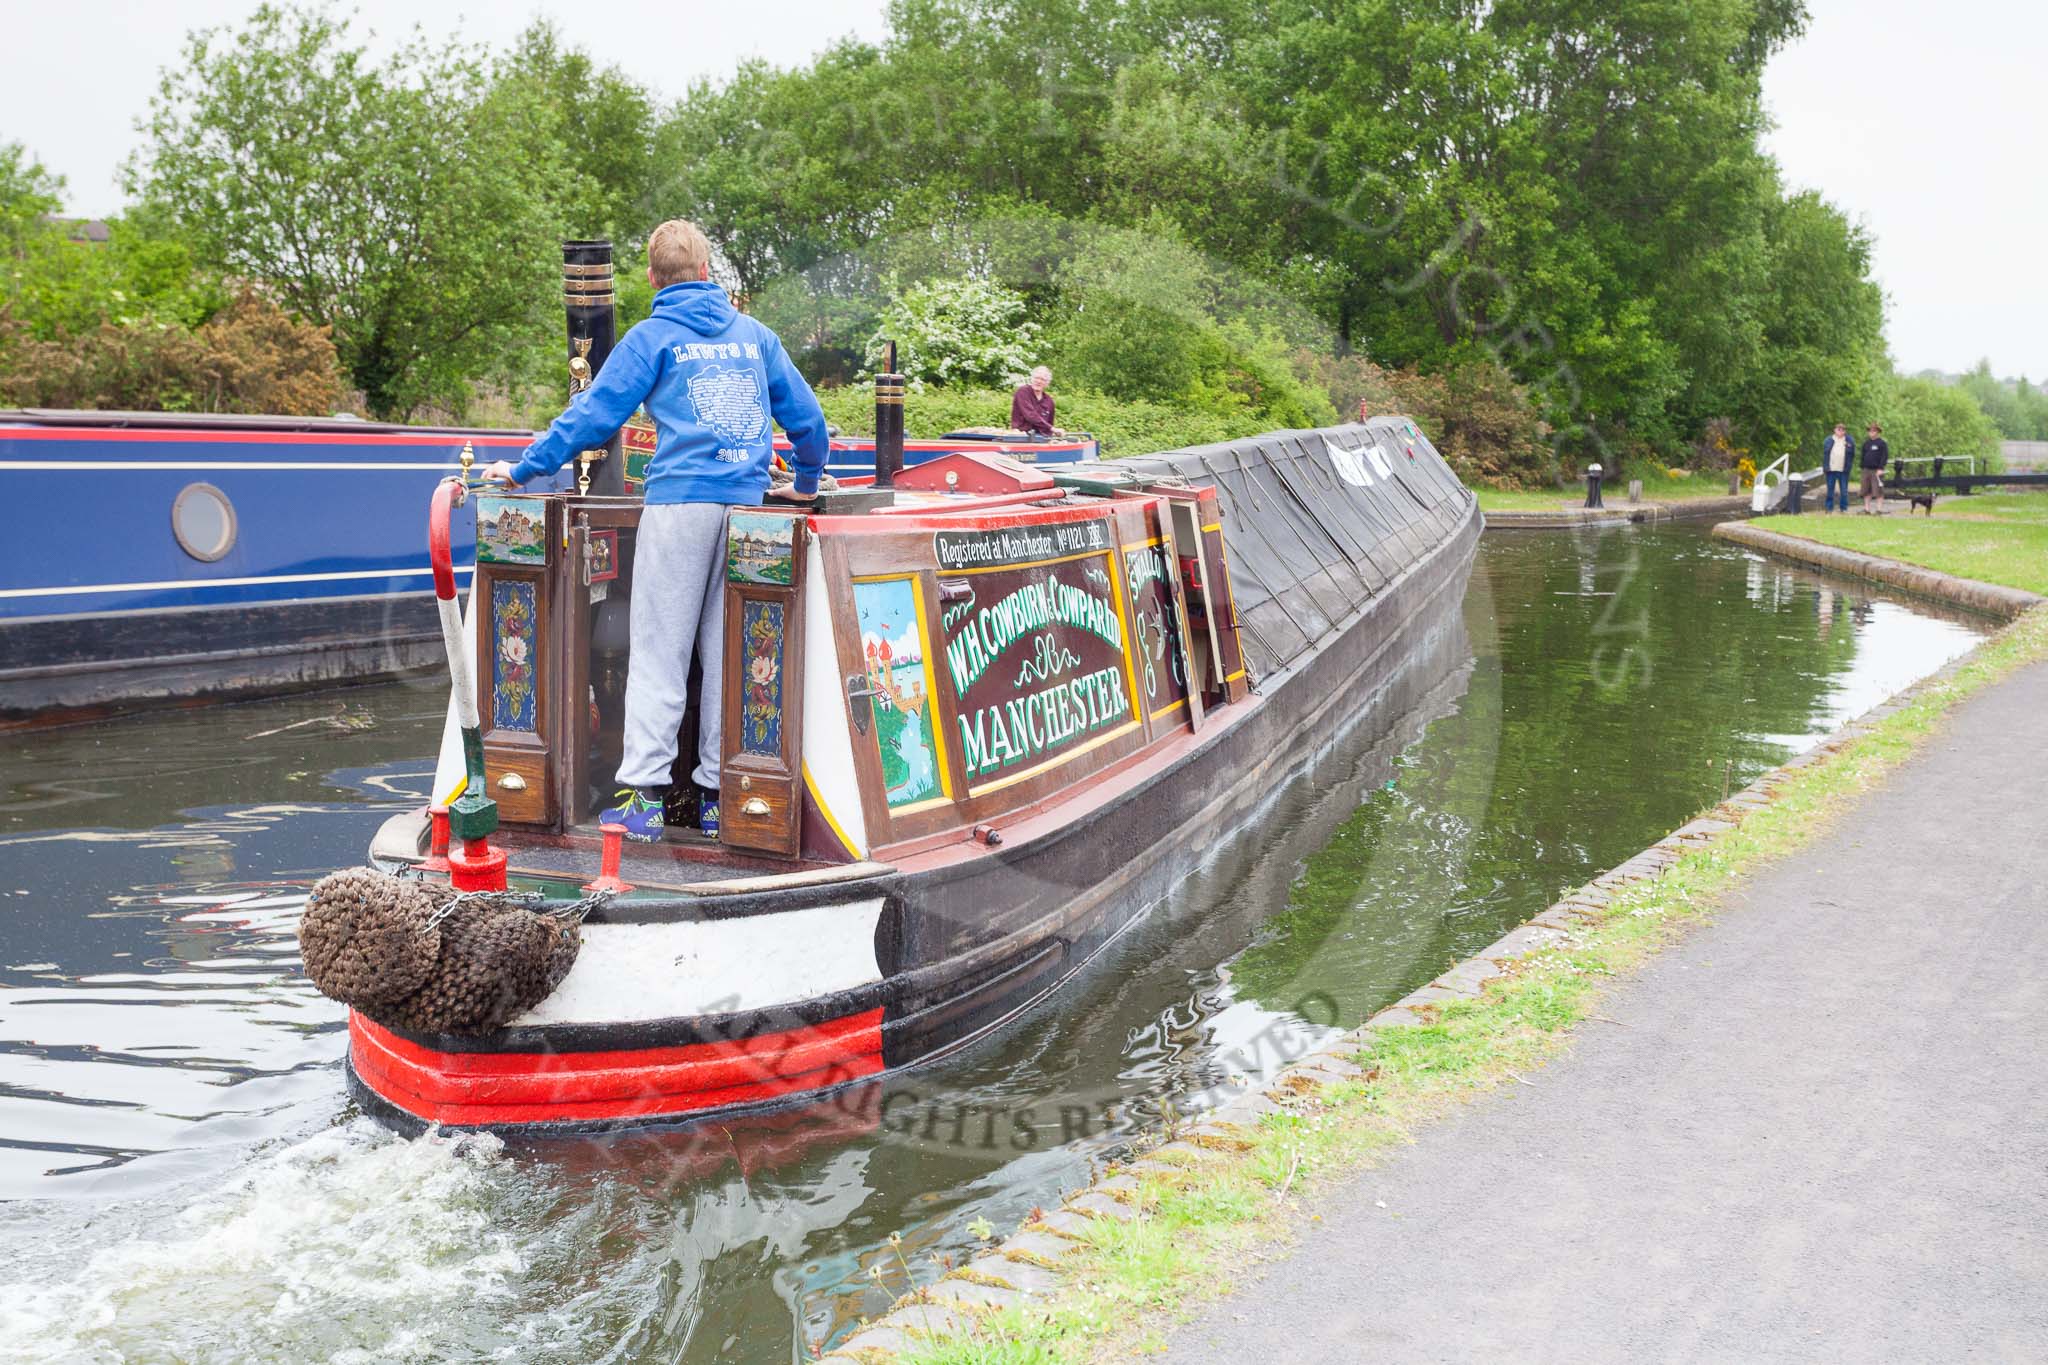 BCN 24h Marathon Challenge 2015: Narrow boat "Swallow" at the Smethwick Locks. For a virtual tour of Swallow see j.mp/bclm-swallow.
Birmingham Canal Navigations,



on 23 May 2015 at 10:31, image #62